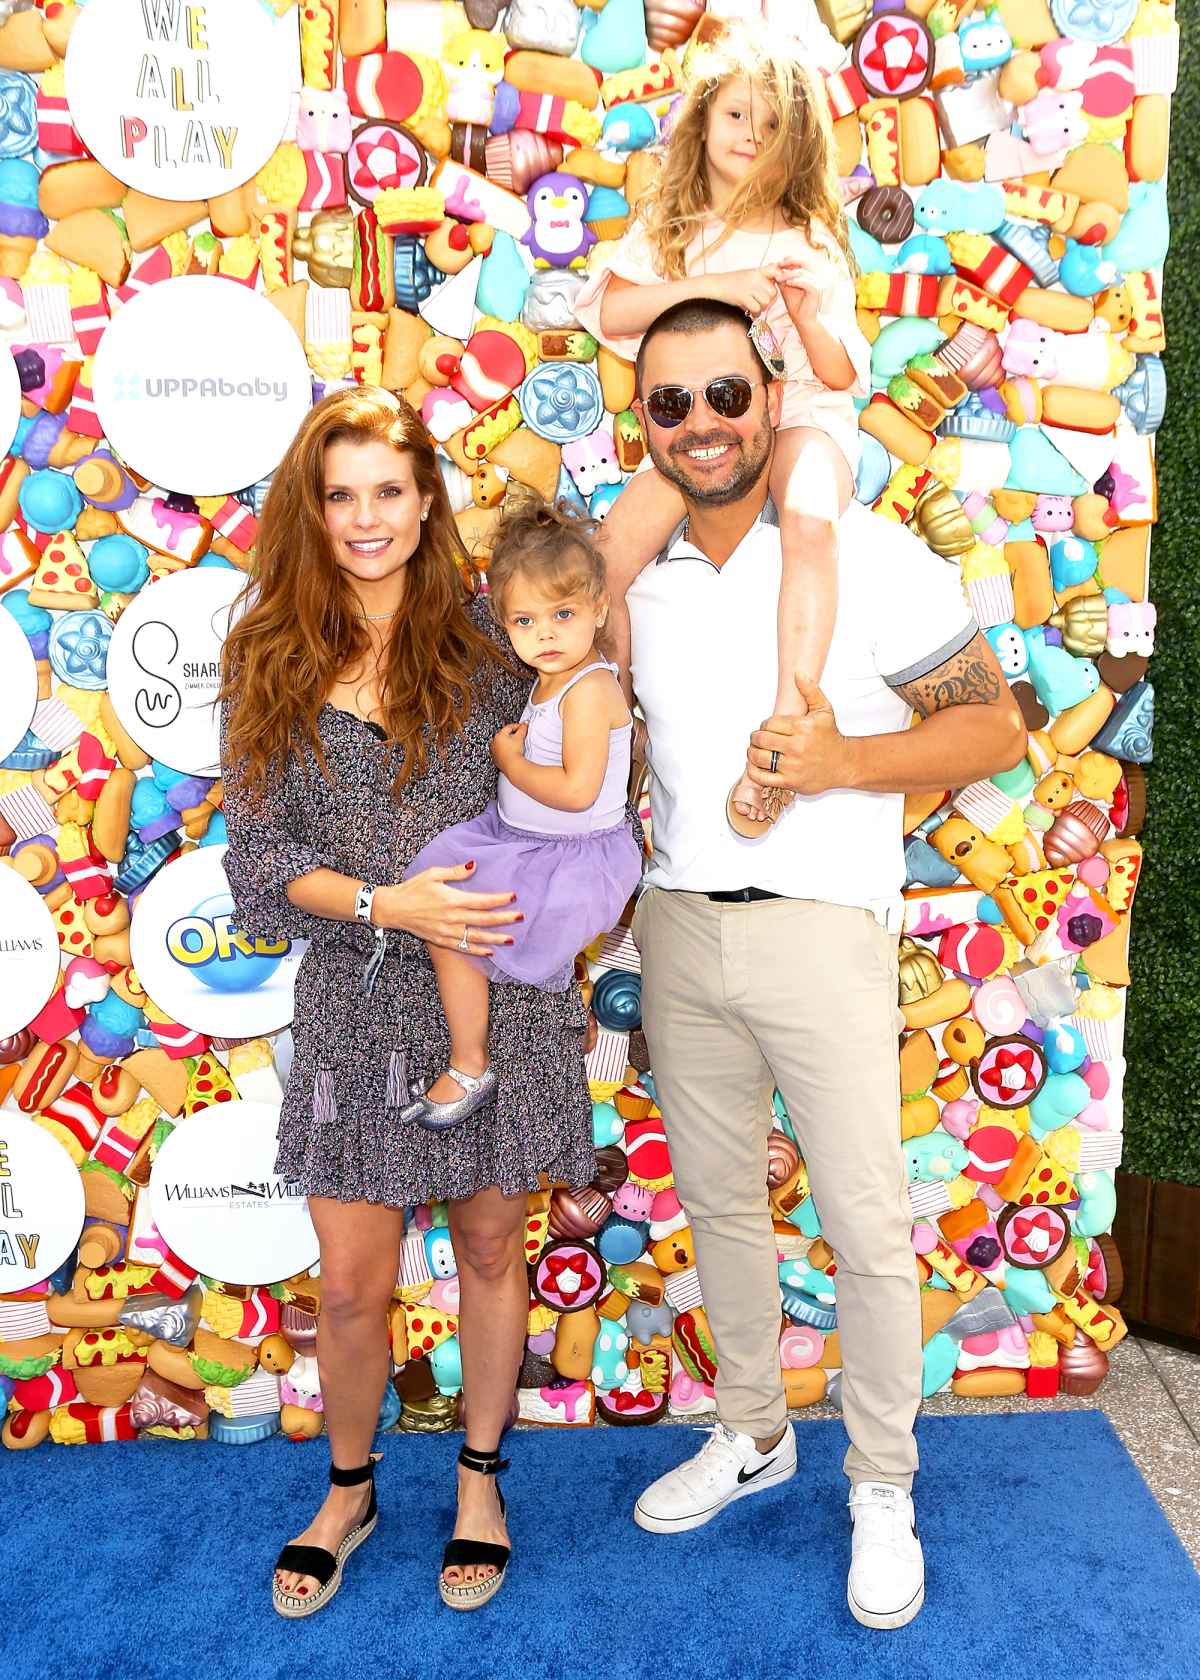 JoAnna Garcia and Nick Swisher are expecting their first child!